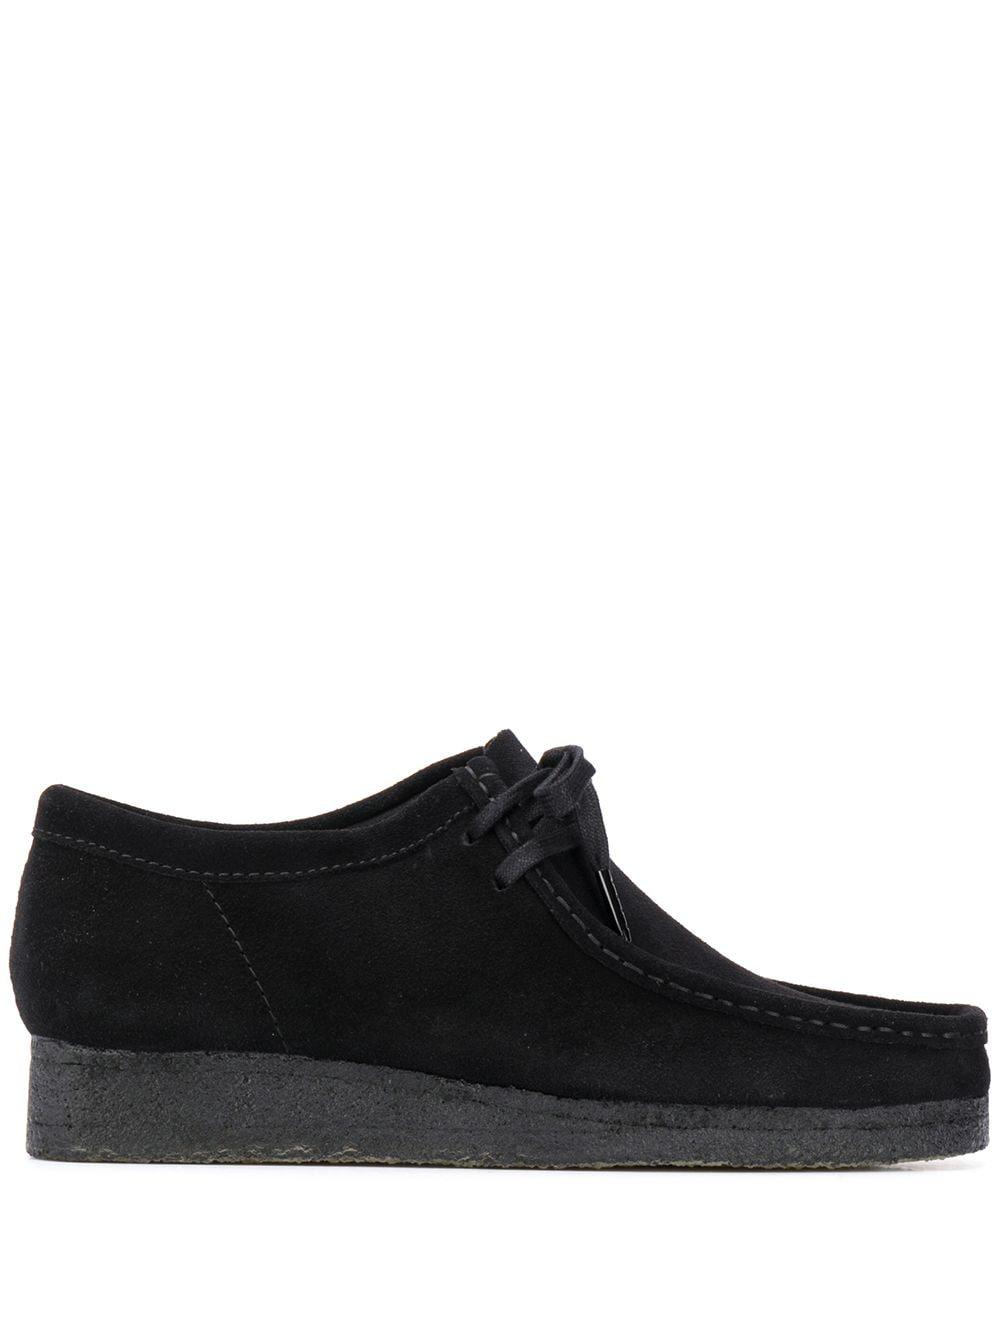 Clarks Suede Wallabee in Black for Men - Save 47% - Lyst